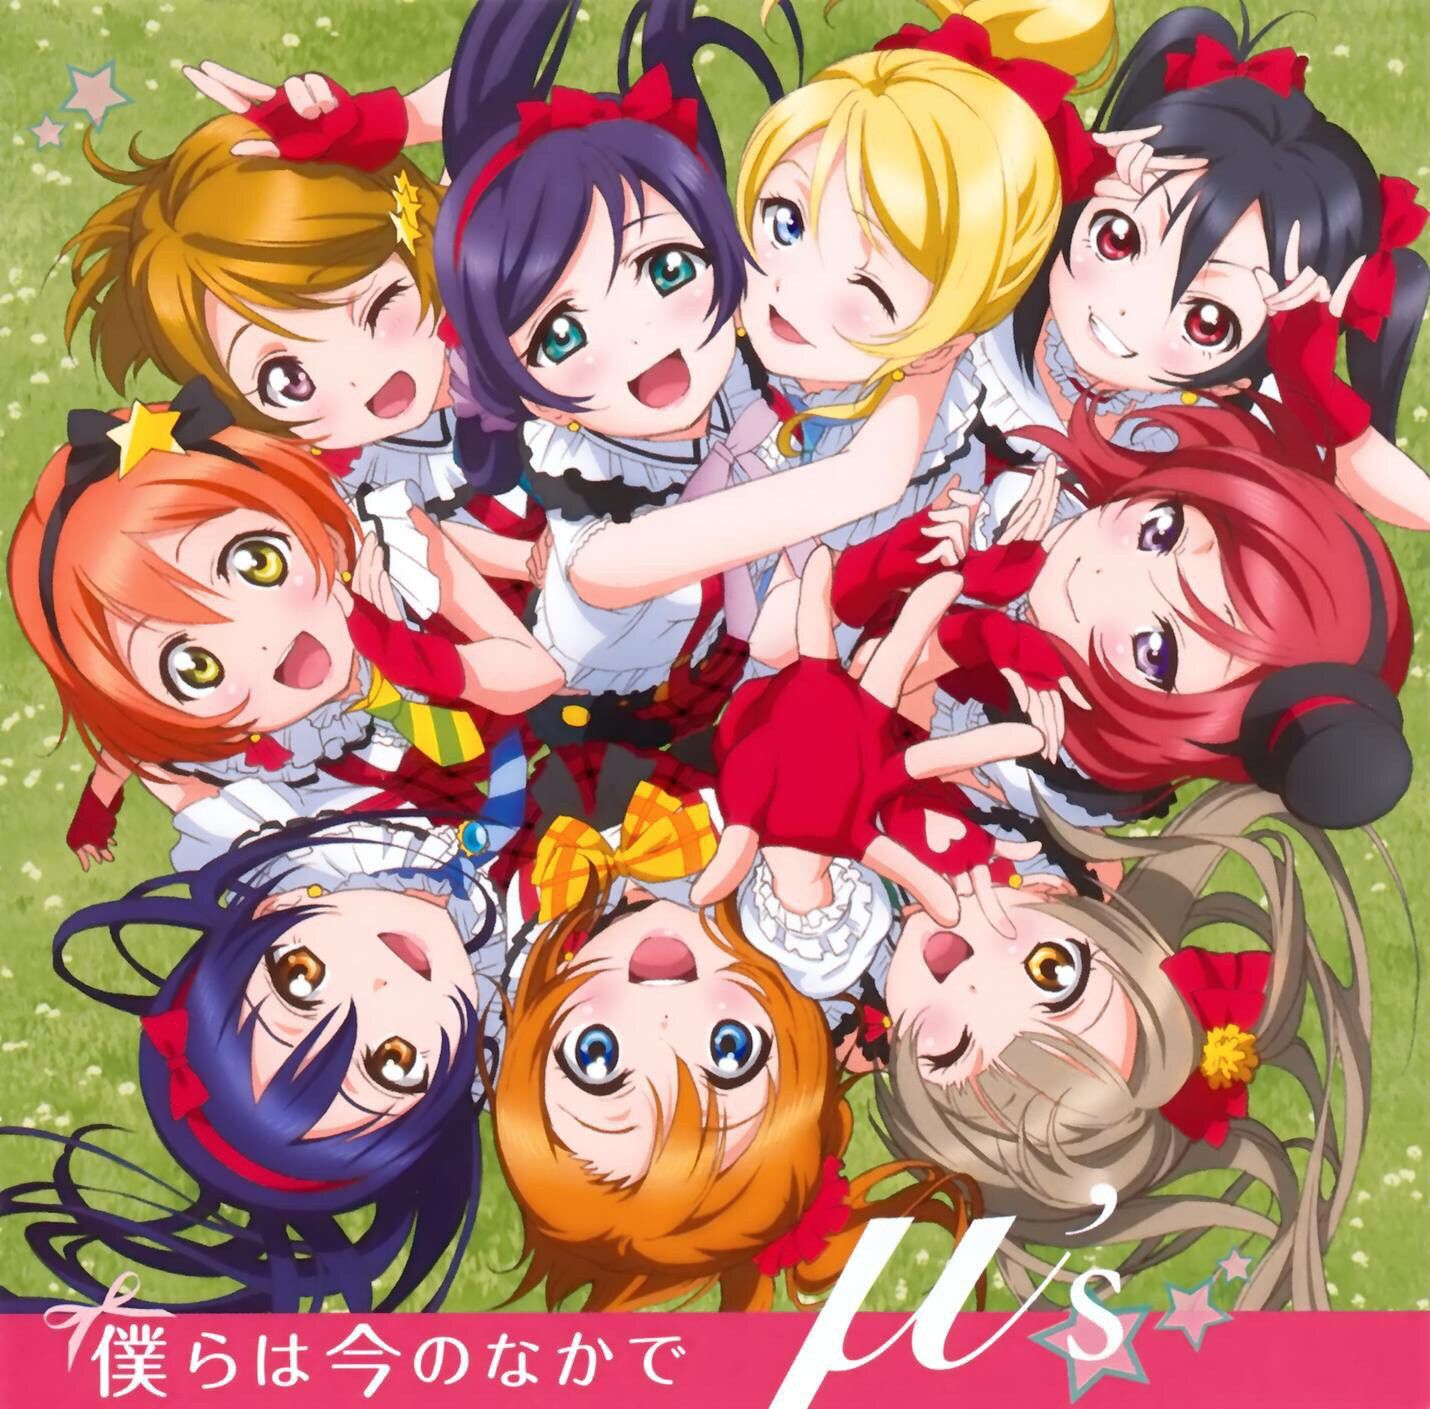 [Large image] "love live! ' The corner www nearly deflated this week and see the beautiful illustrations of high quality CD's 12